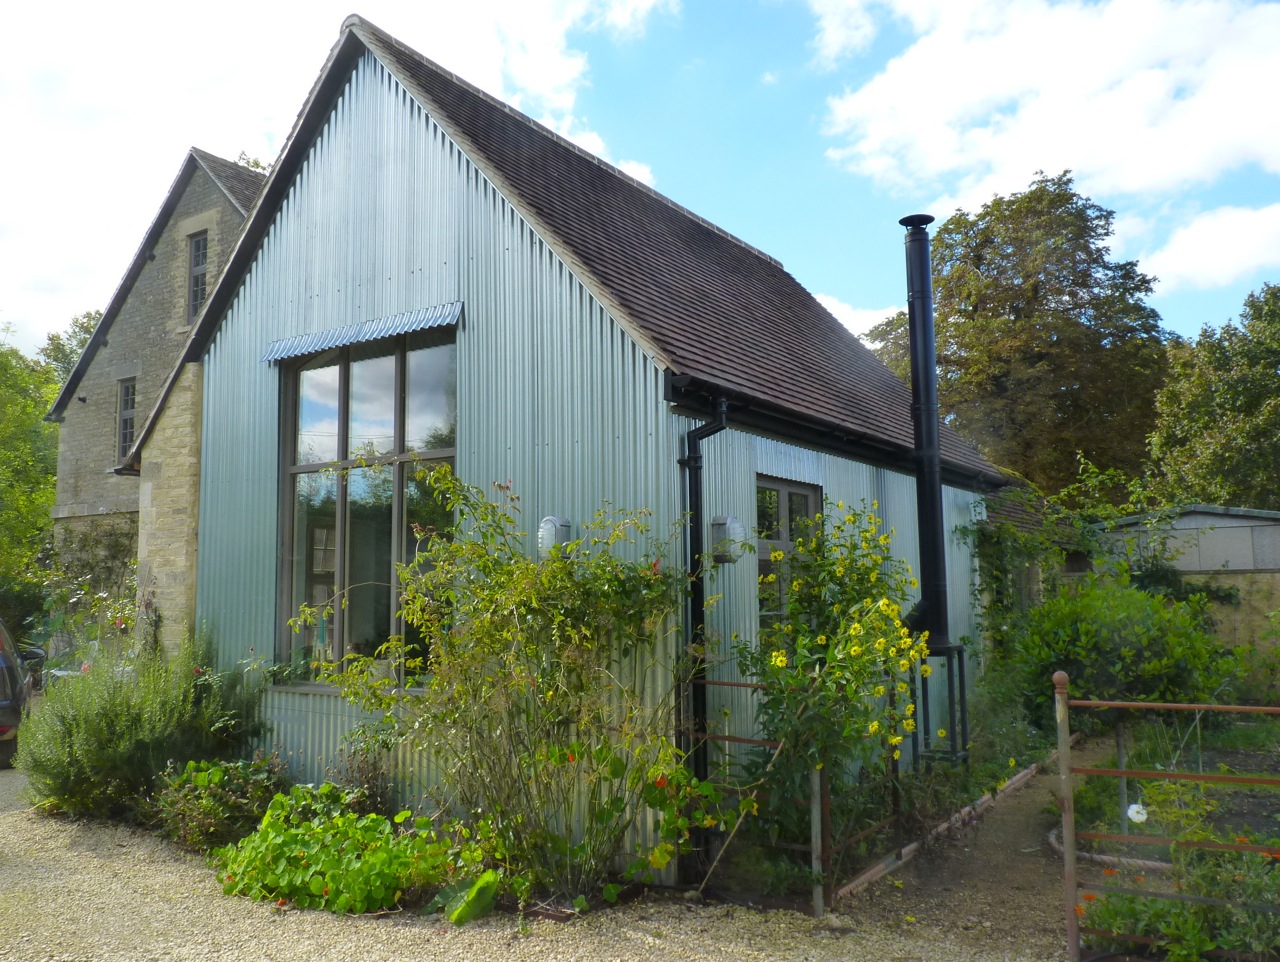 ‘When we reached 80 each, Matthew thought it would be a good idea if we were nearer, so we packed our bags and followed him here,’ she says. ‘Matthew designed it, it was a poky little cottage but he added another floor for Peter’s studio, and my studio and the living room.’ 'I really do like growing vegetables very much.'